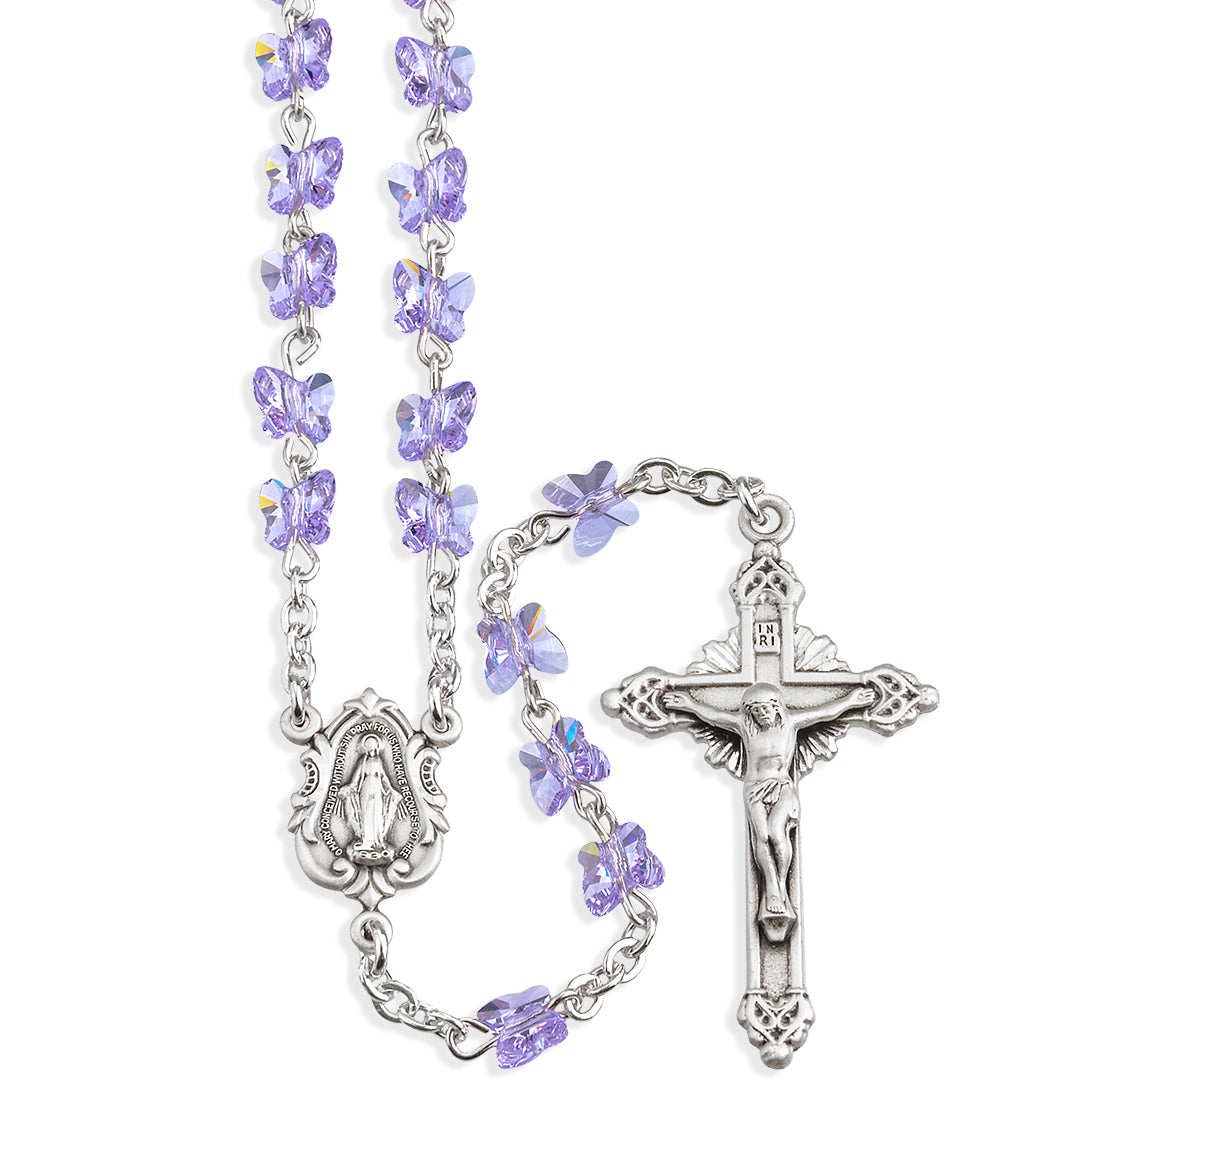 Sterling Silver Rosary Hand Made with 6mm Swarovski Crystal 6mm Violet Butterfly Beads by HMH